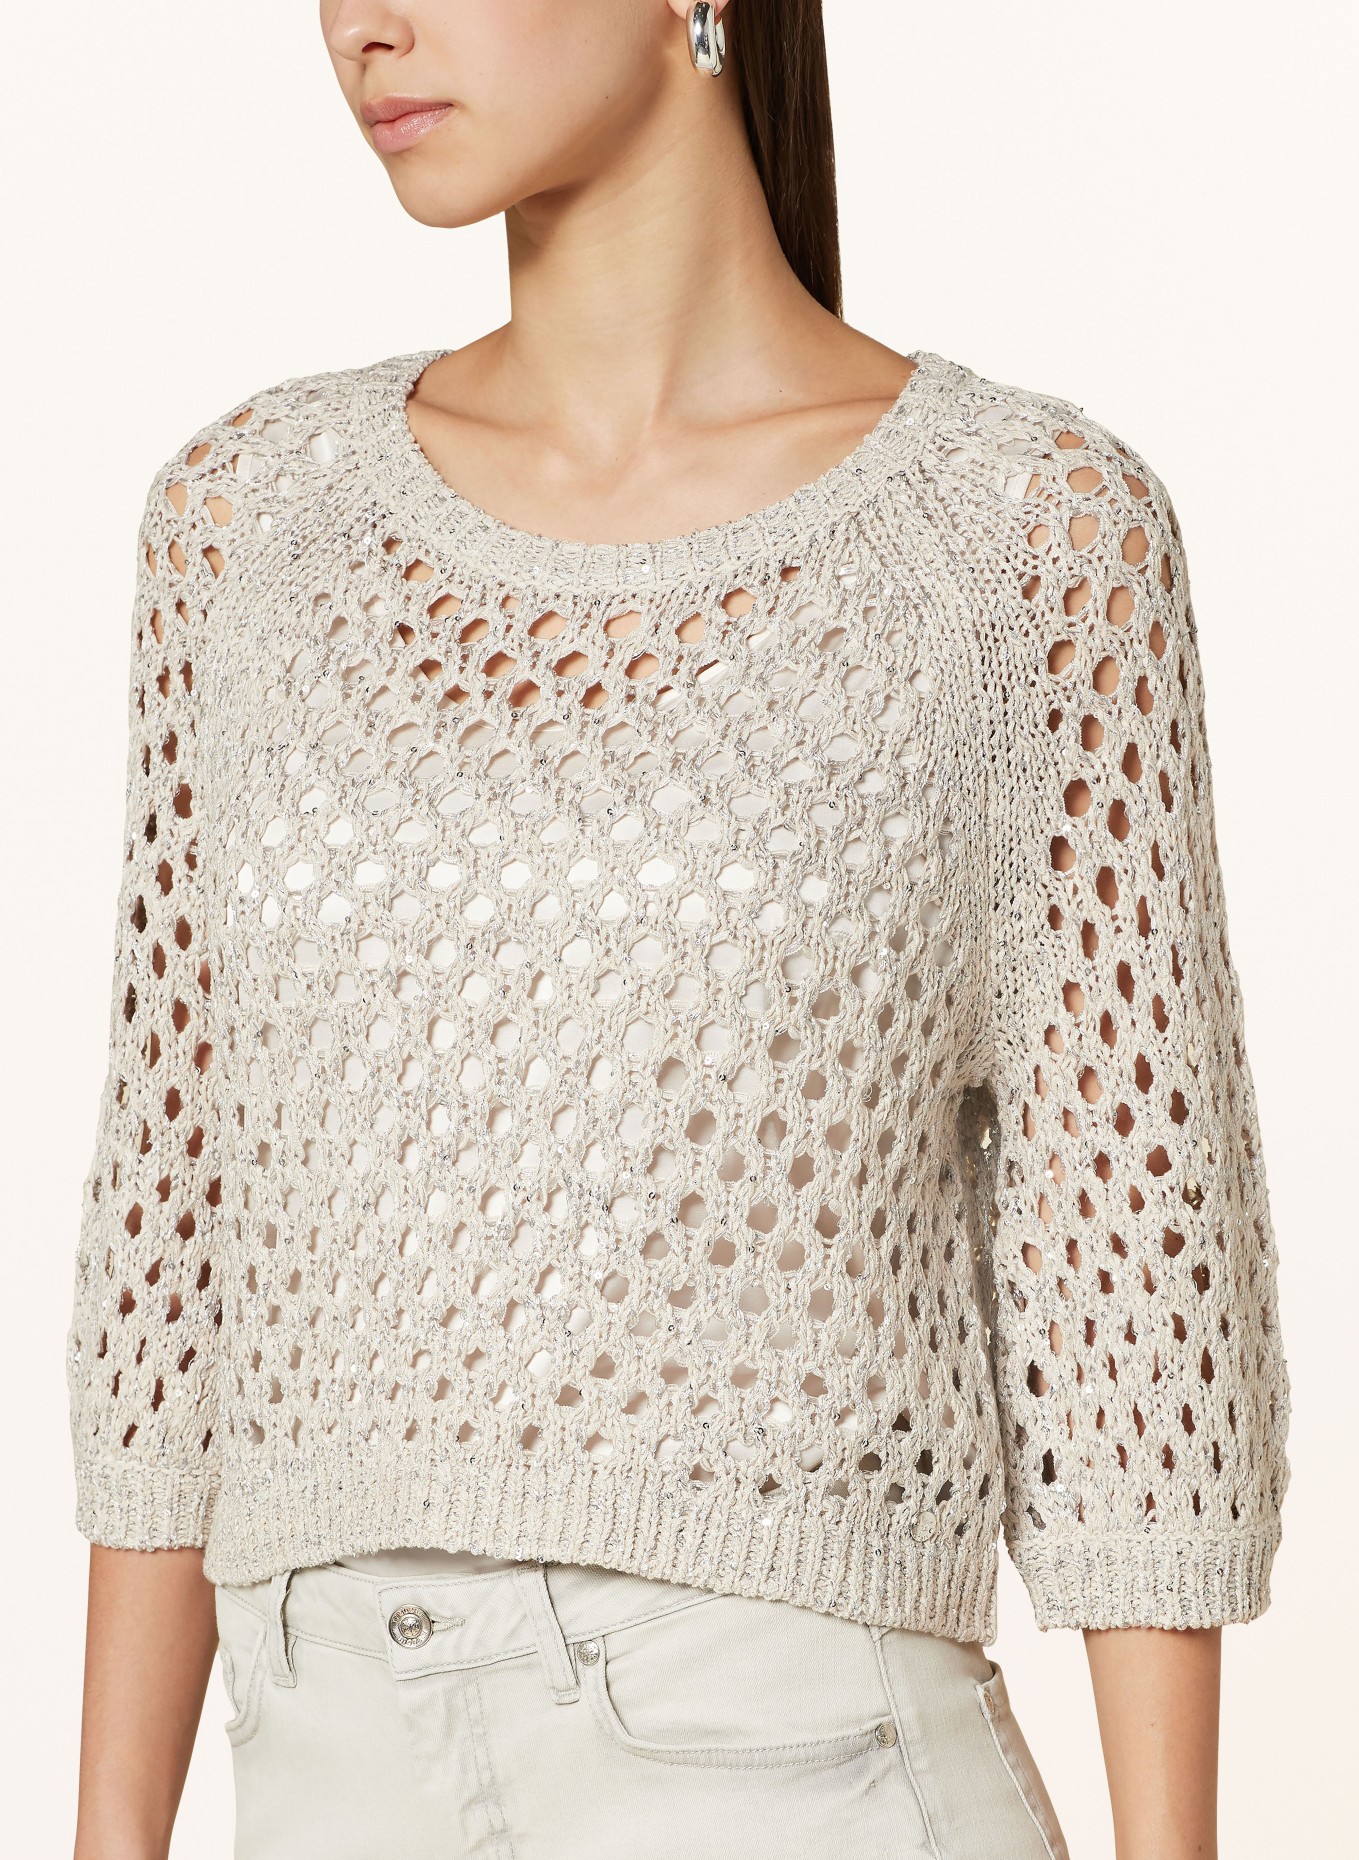 monari Knit shirt with 3/4 sleeves and sequins, Color: 540 light sand (Image 4)